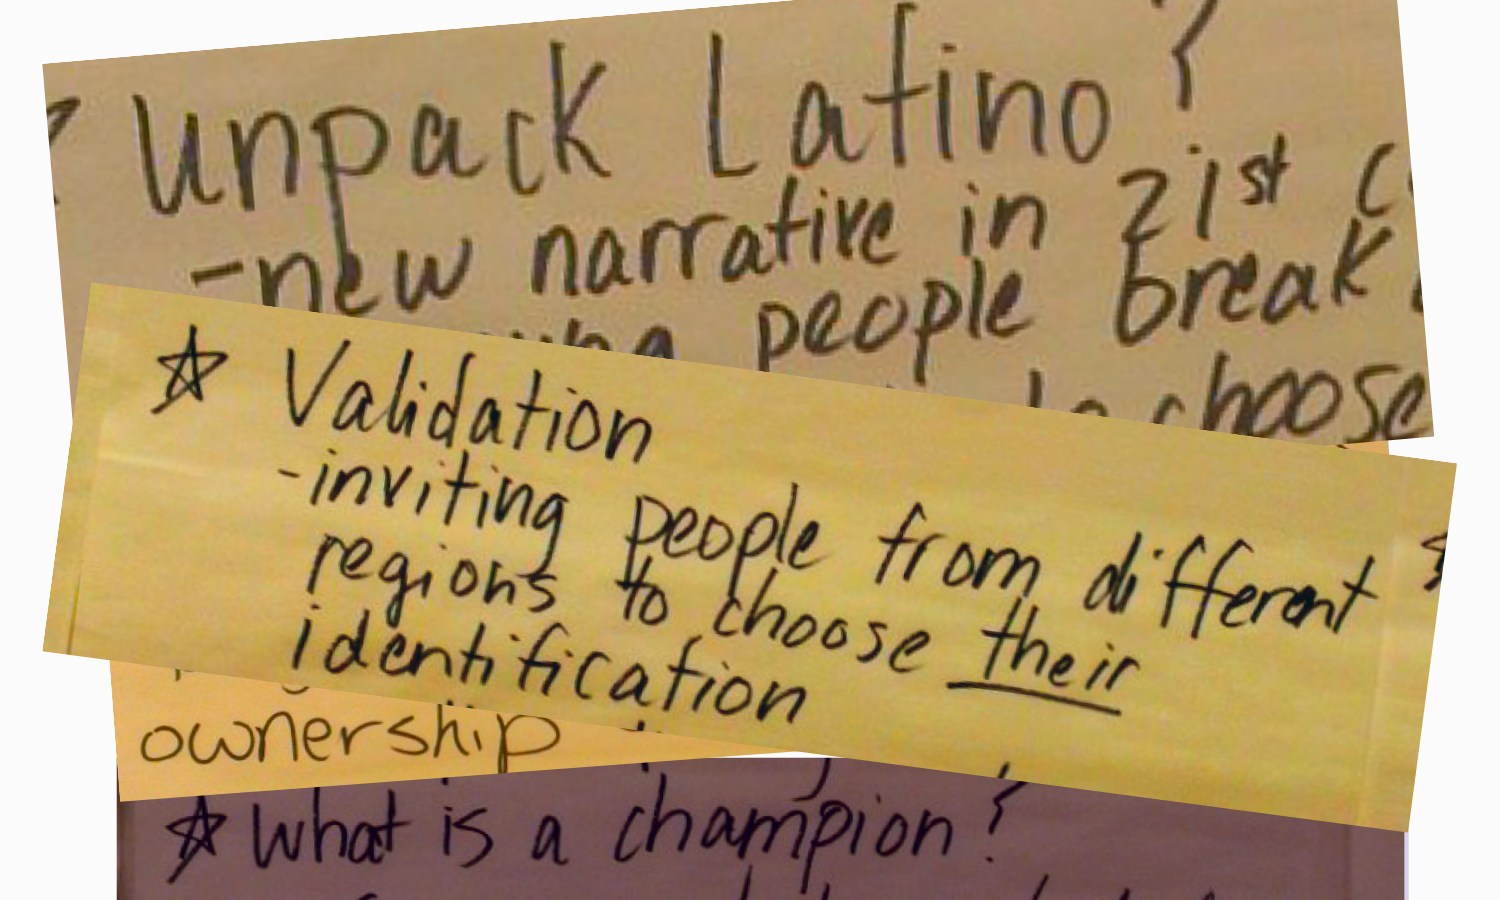 Stylized handwritten notes reading variously: Unpack Latino?, validation: inviting people from different regions to choose their identification; ownership; What is a champion? 